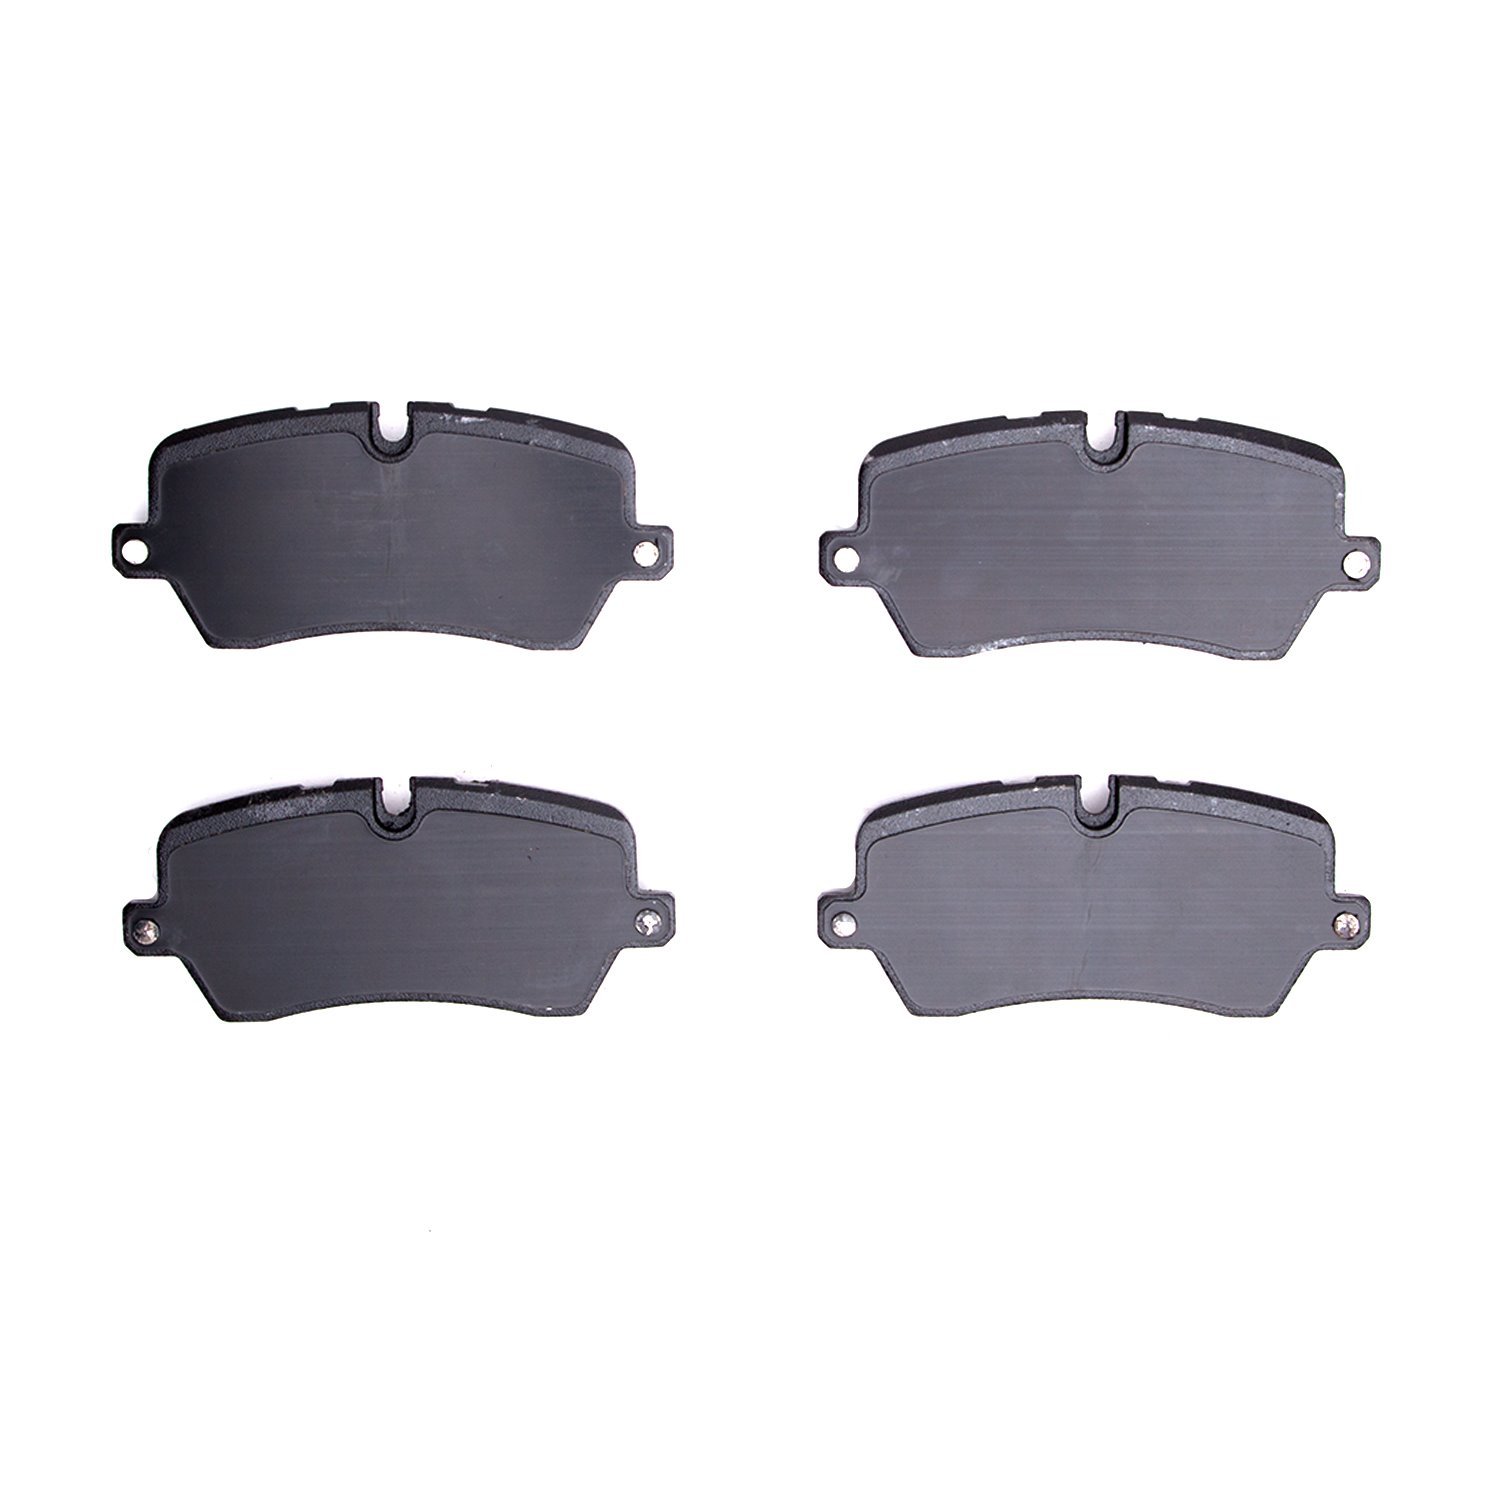 1600-1692-00 5000 Euro Ceramic Brake Pads, Fits Select Land Rover, Position: Rear